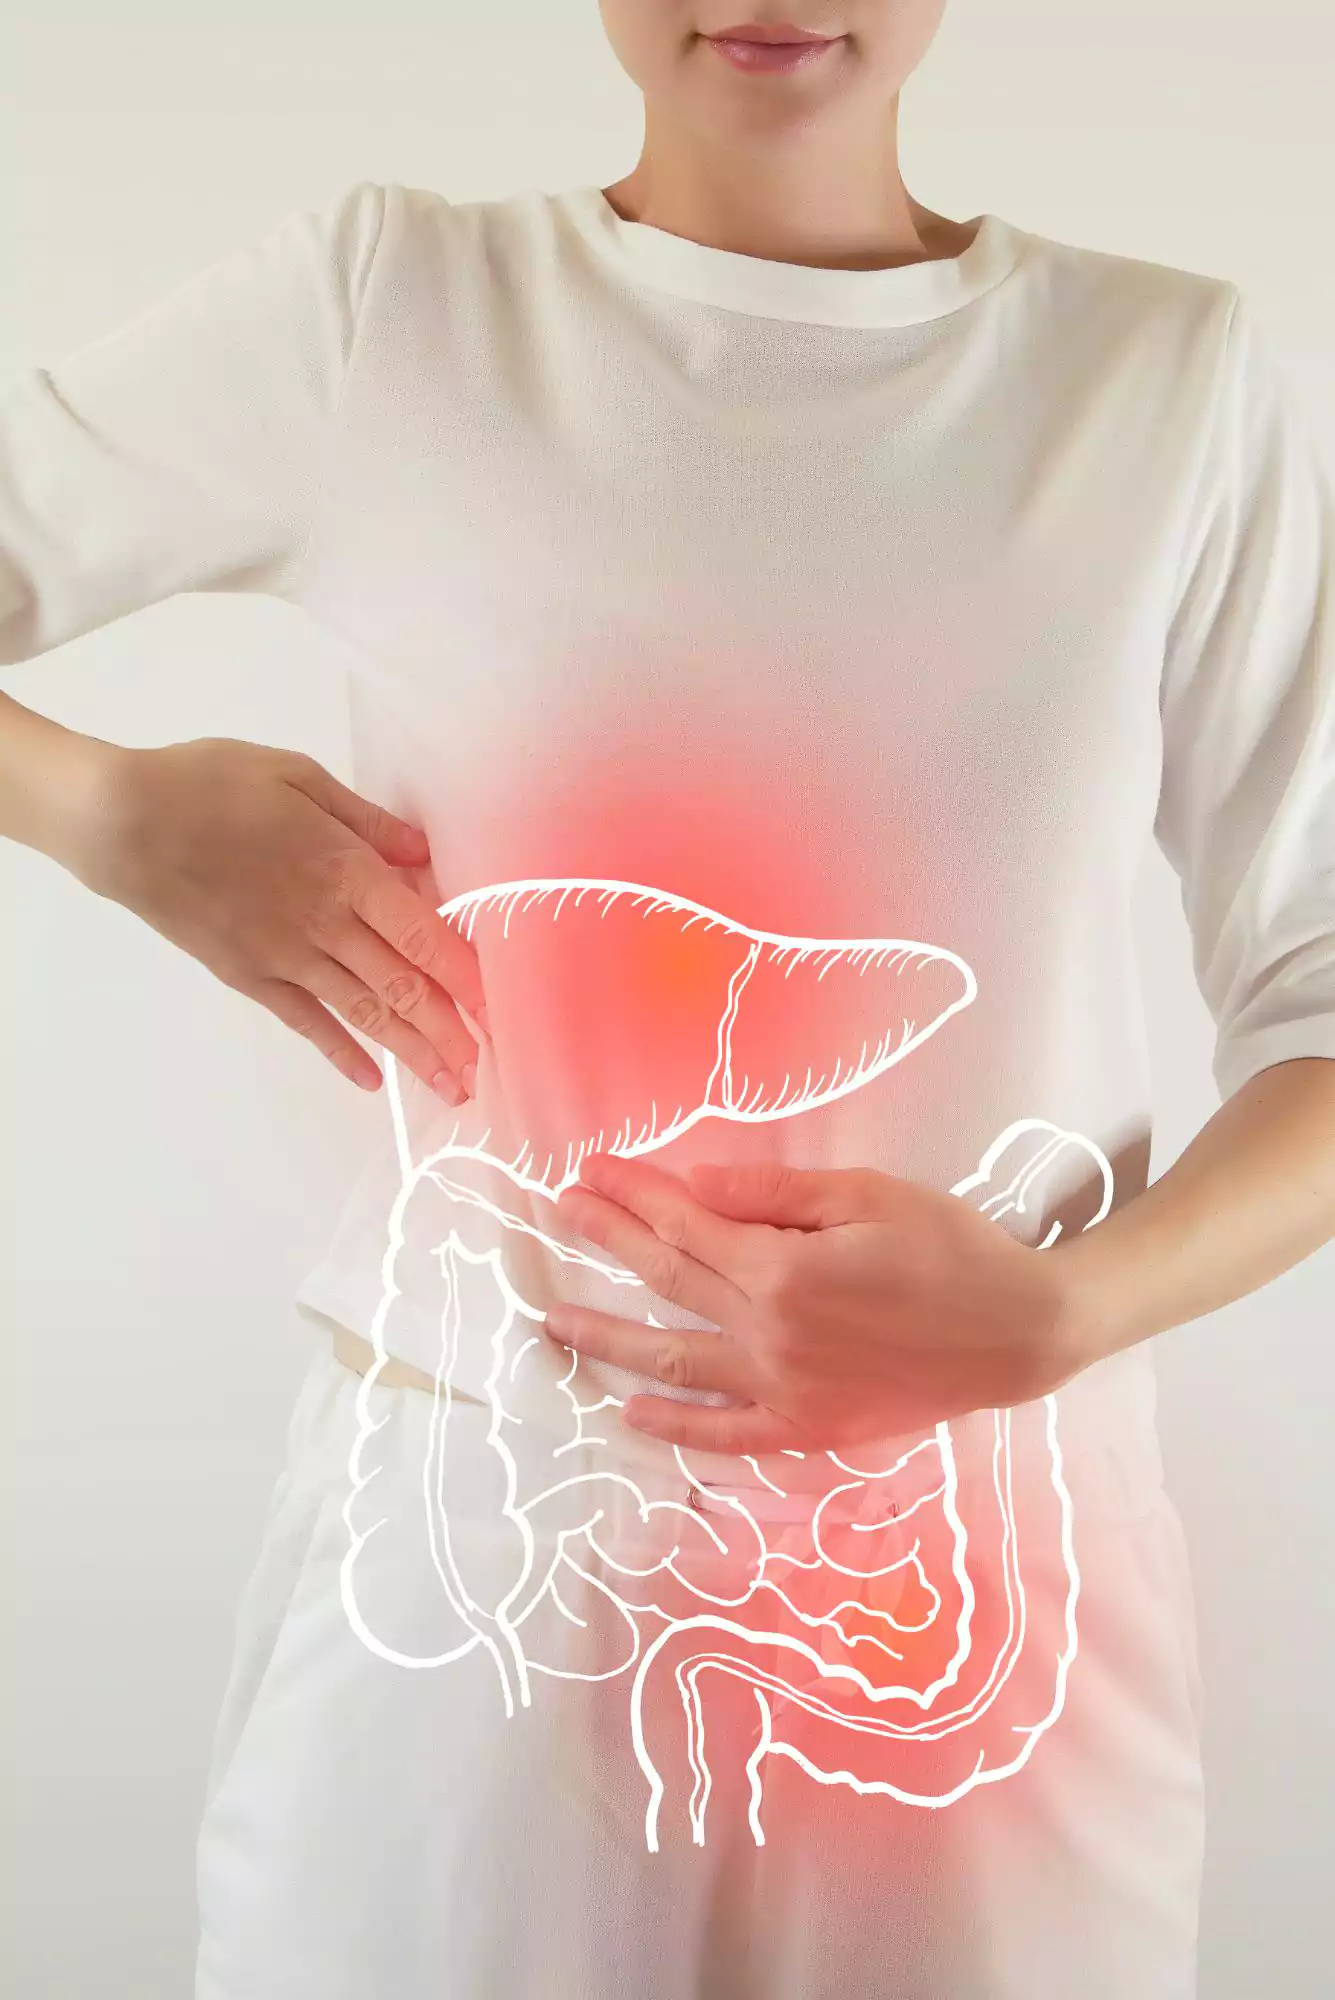 Abdomen Pain& Digestion Issues